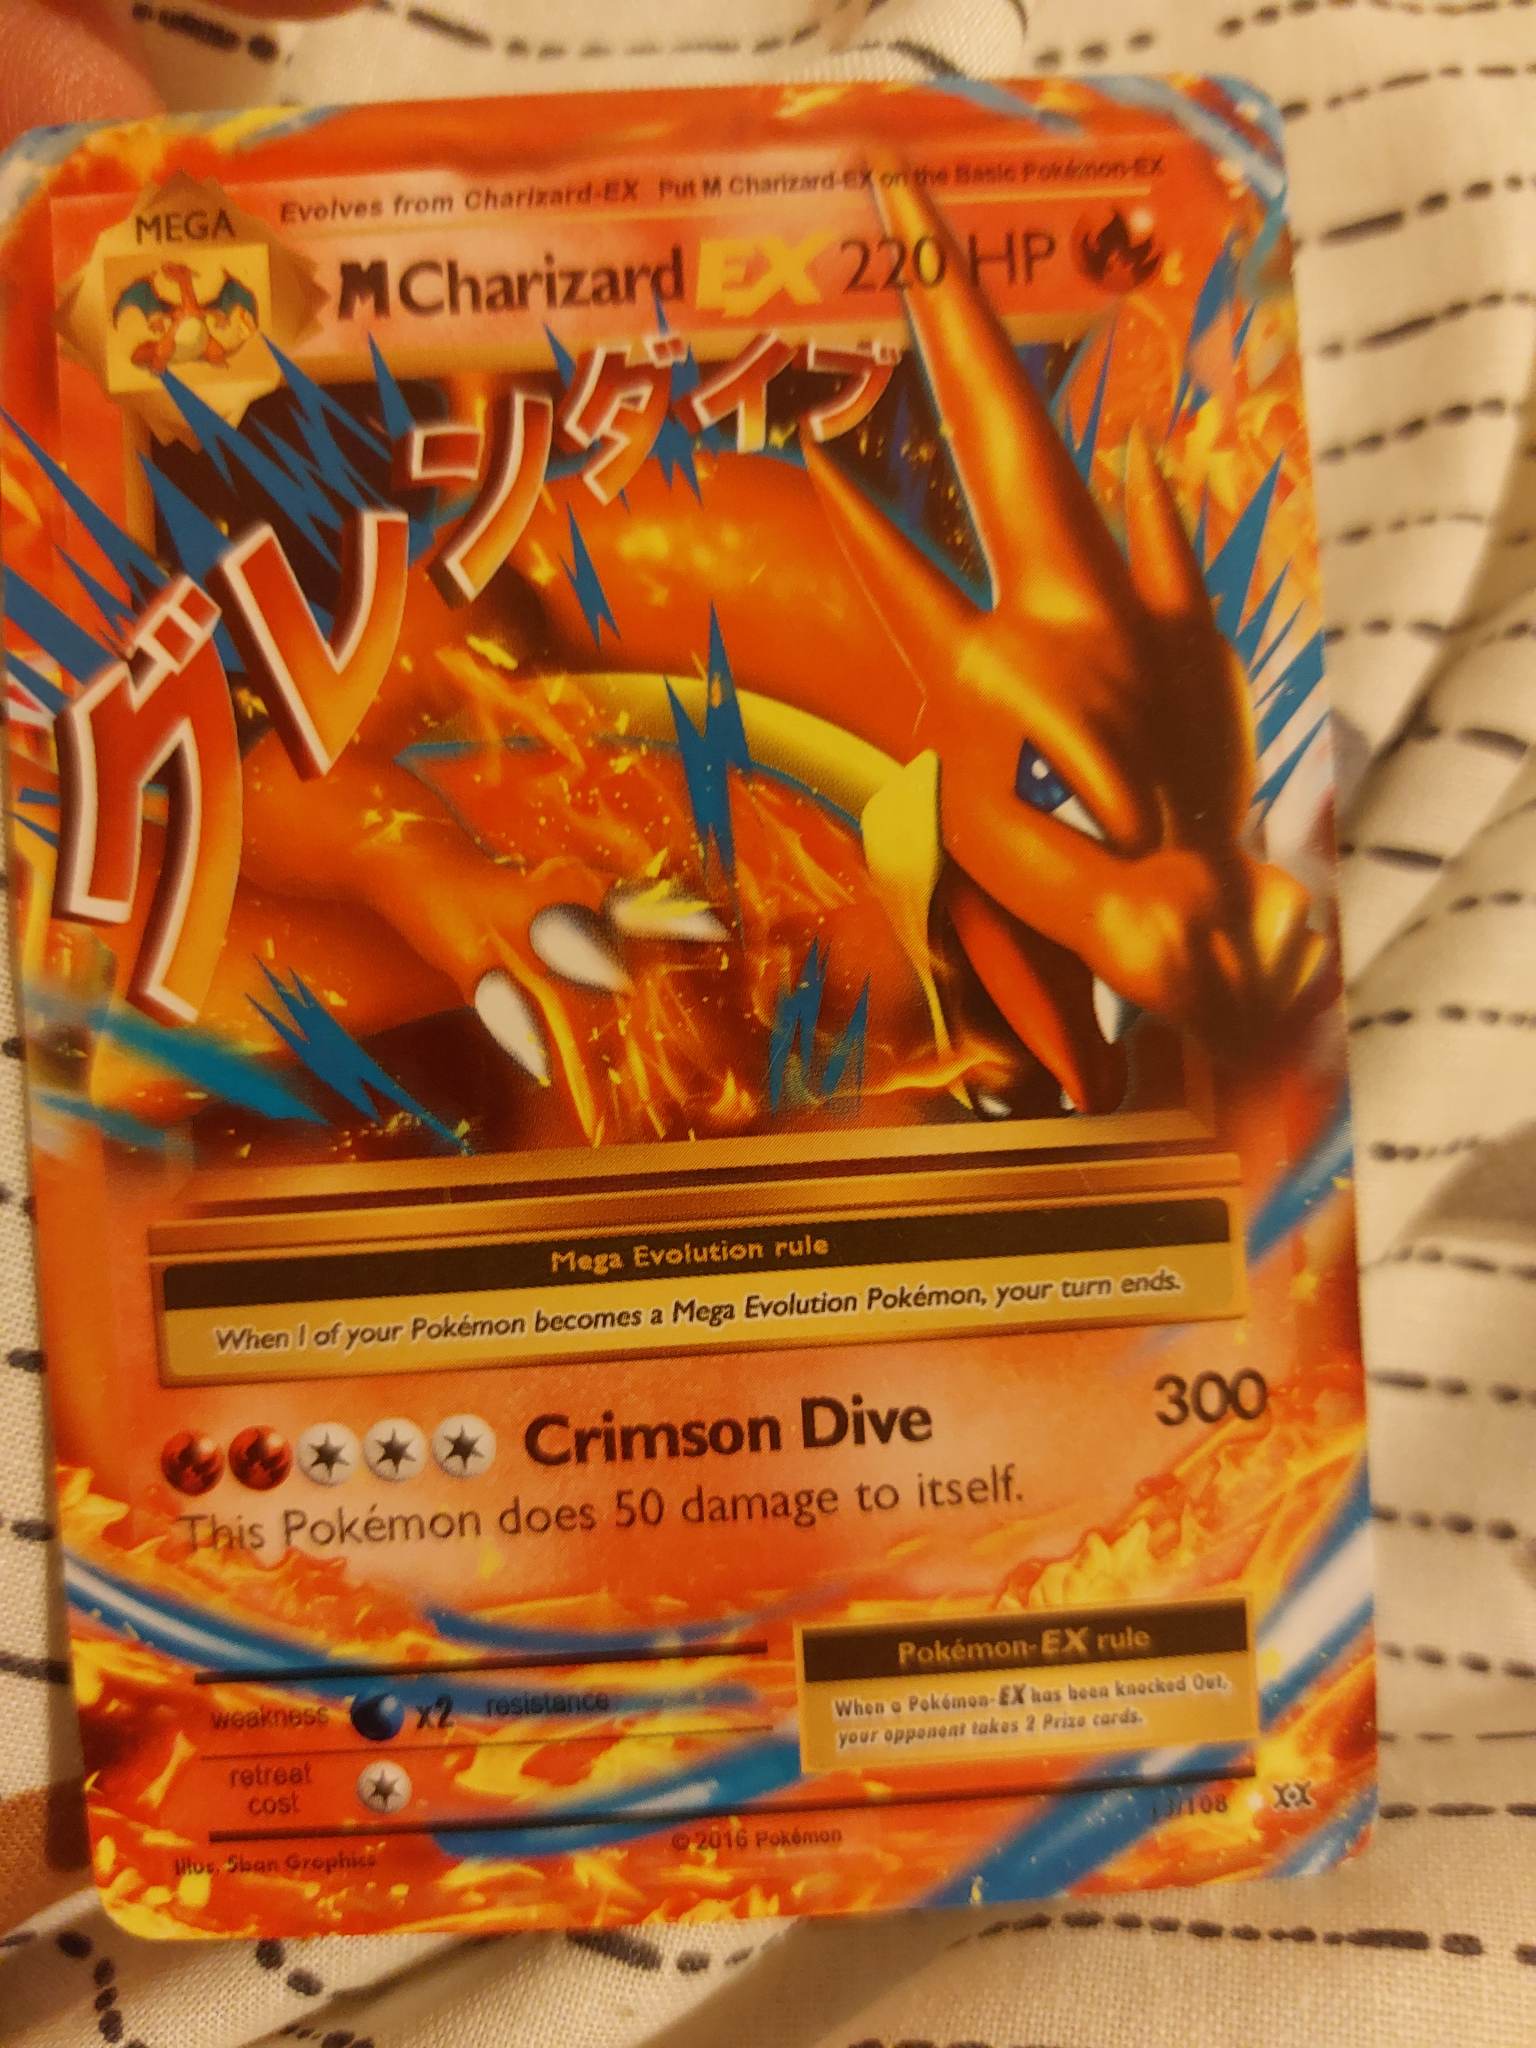 An example of a fake Charizard card